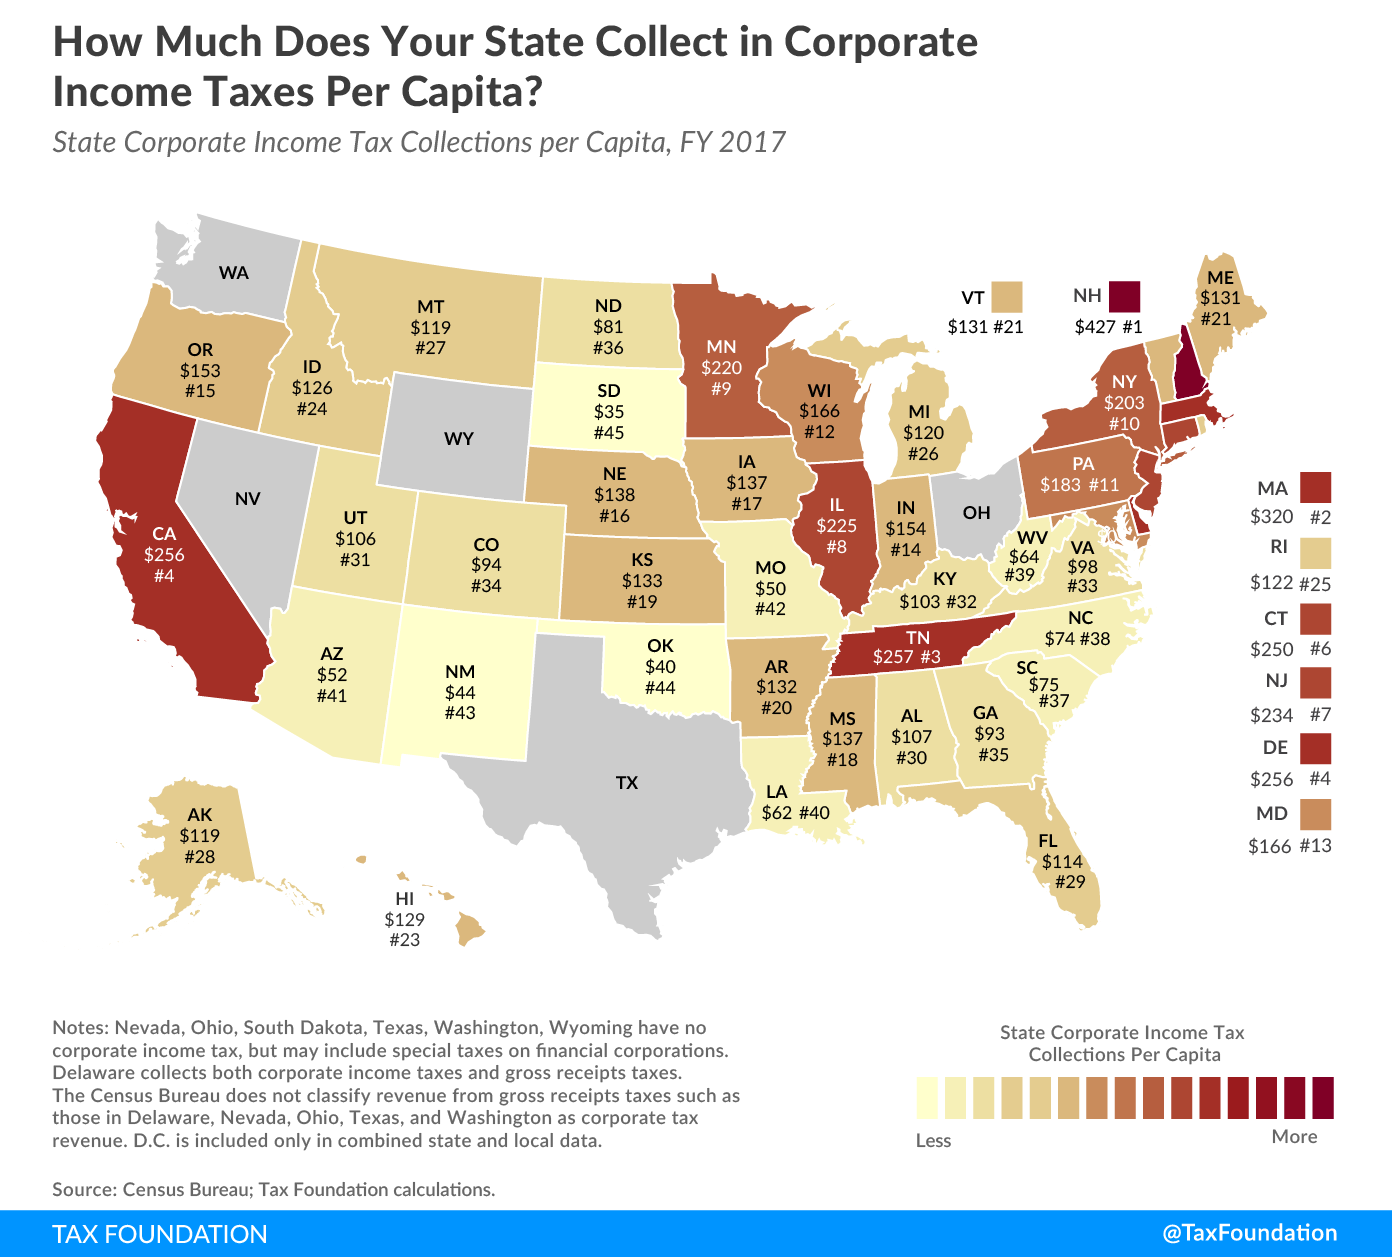 How Much Does Your State Collect in Corporate Income Taxes Per Capita?